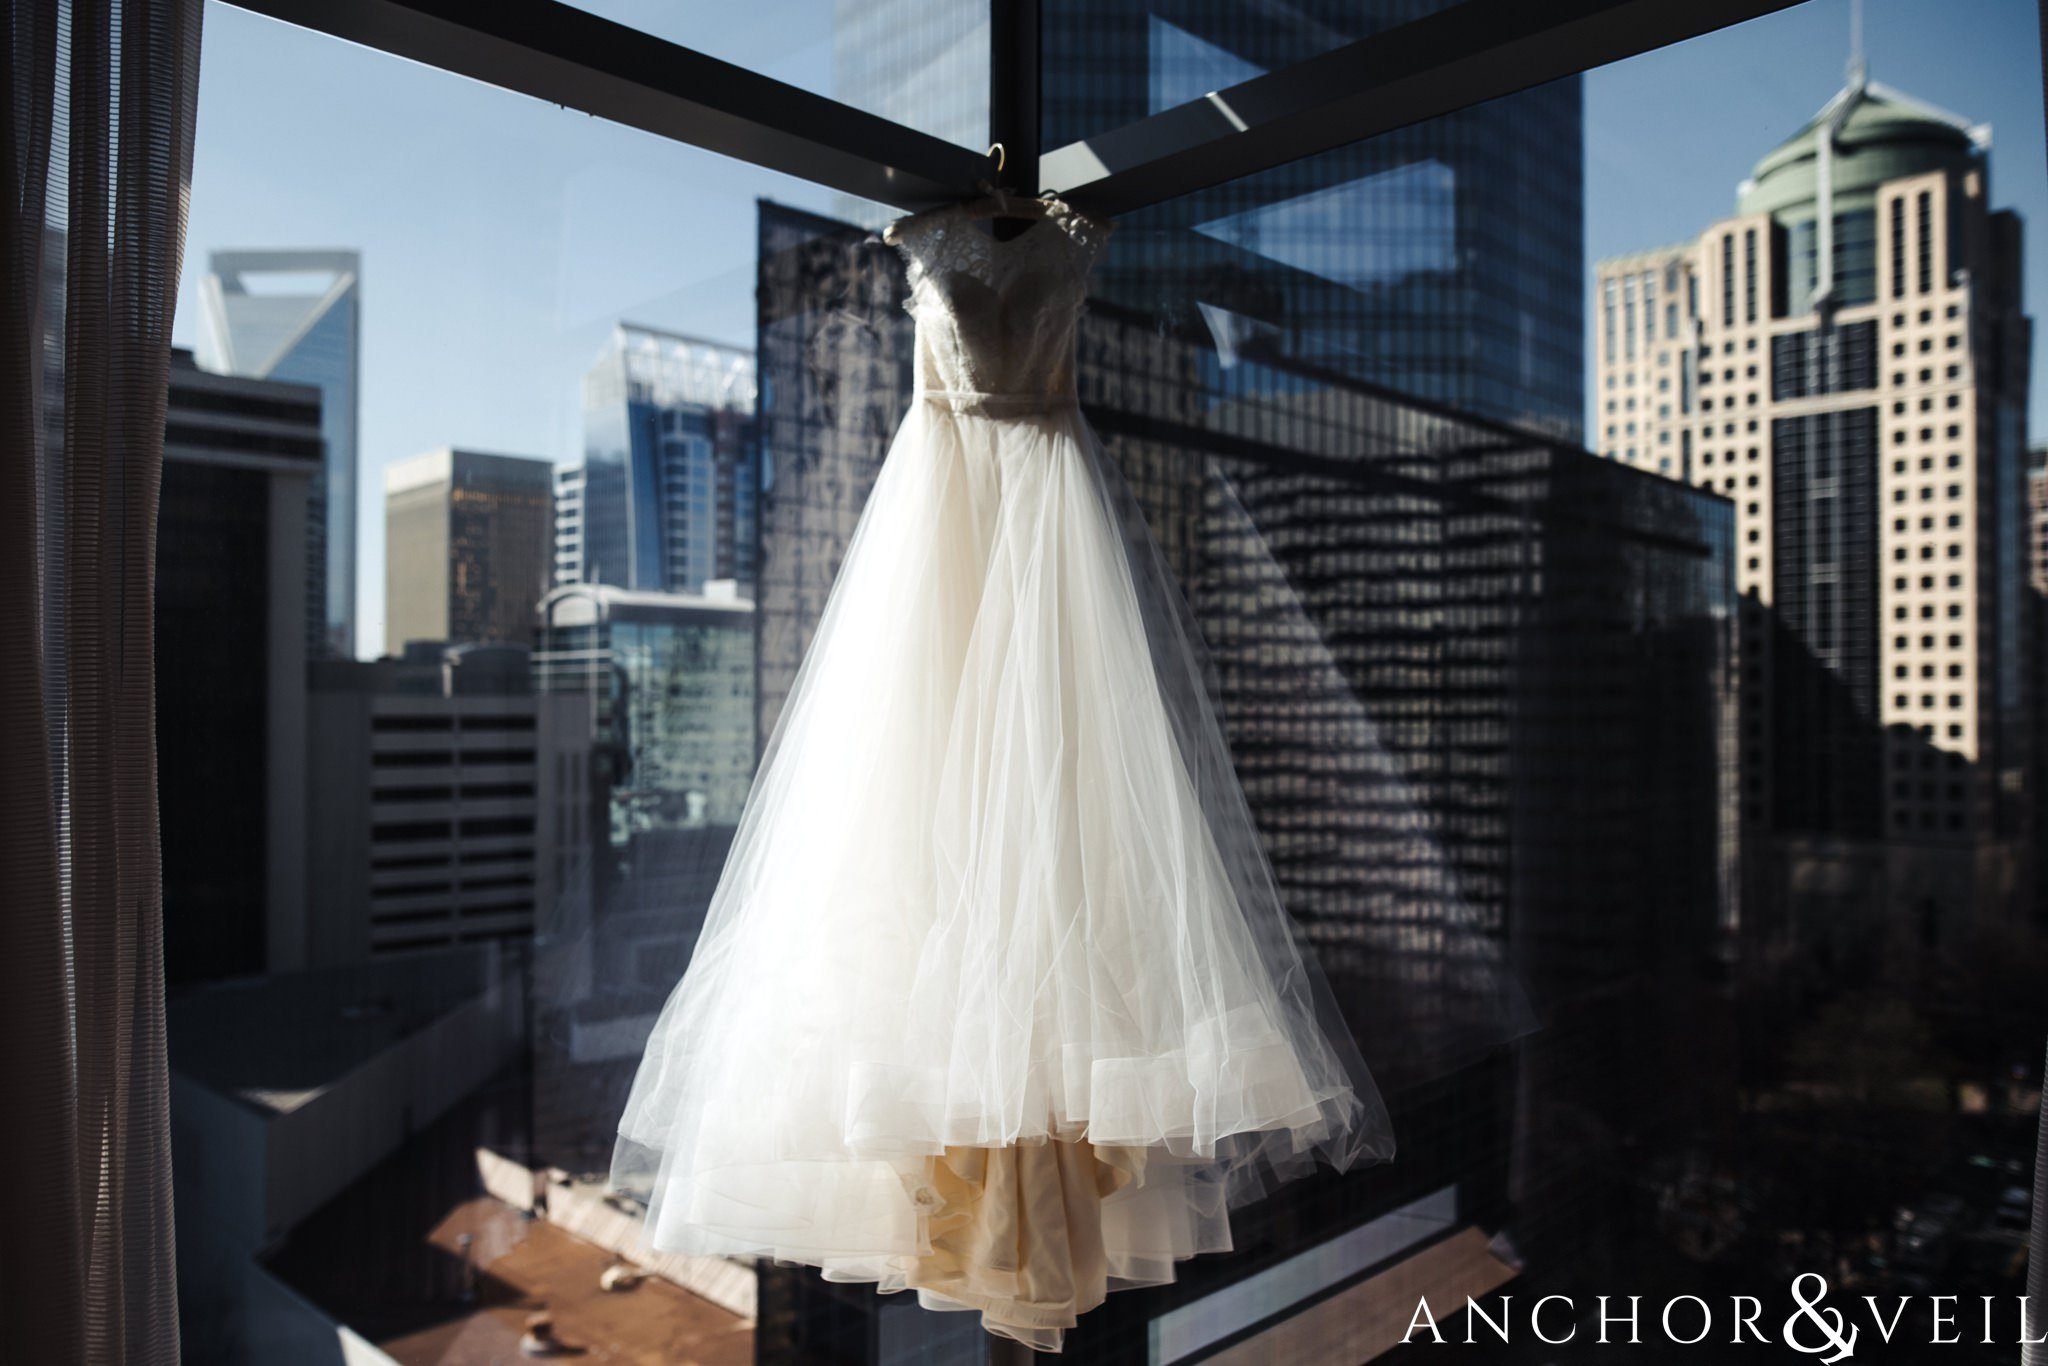 Haley Paige Dress hanging during their ritz Carlton wedding in Uptown Charlotte NC